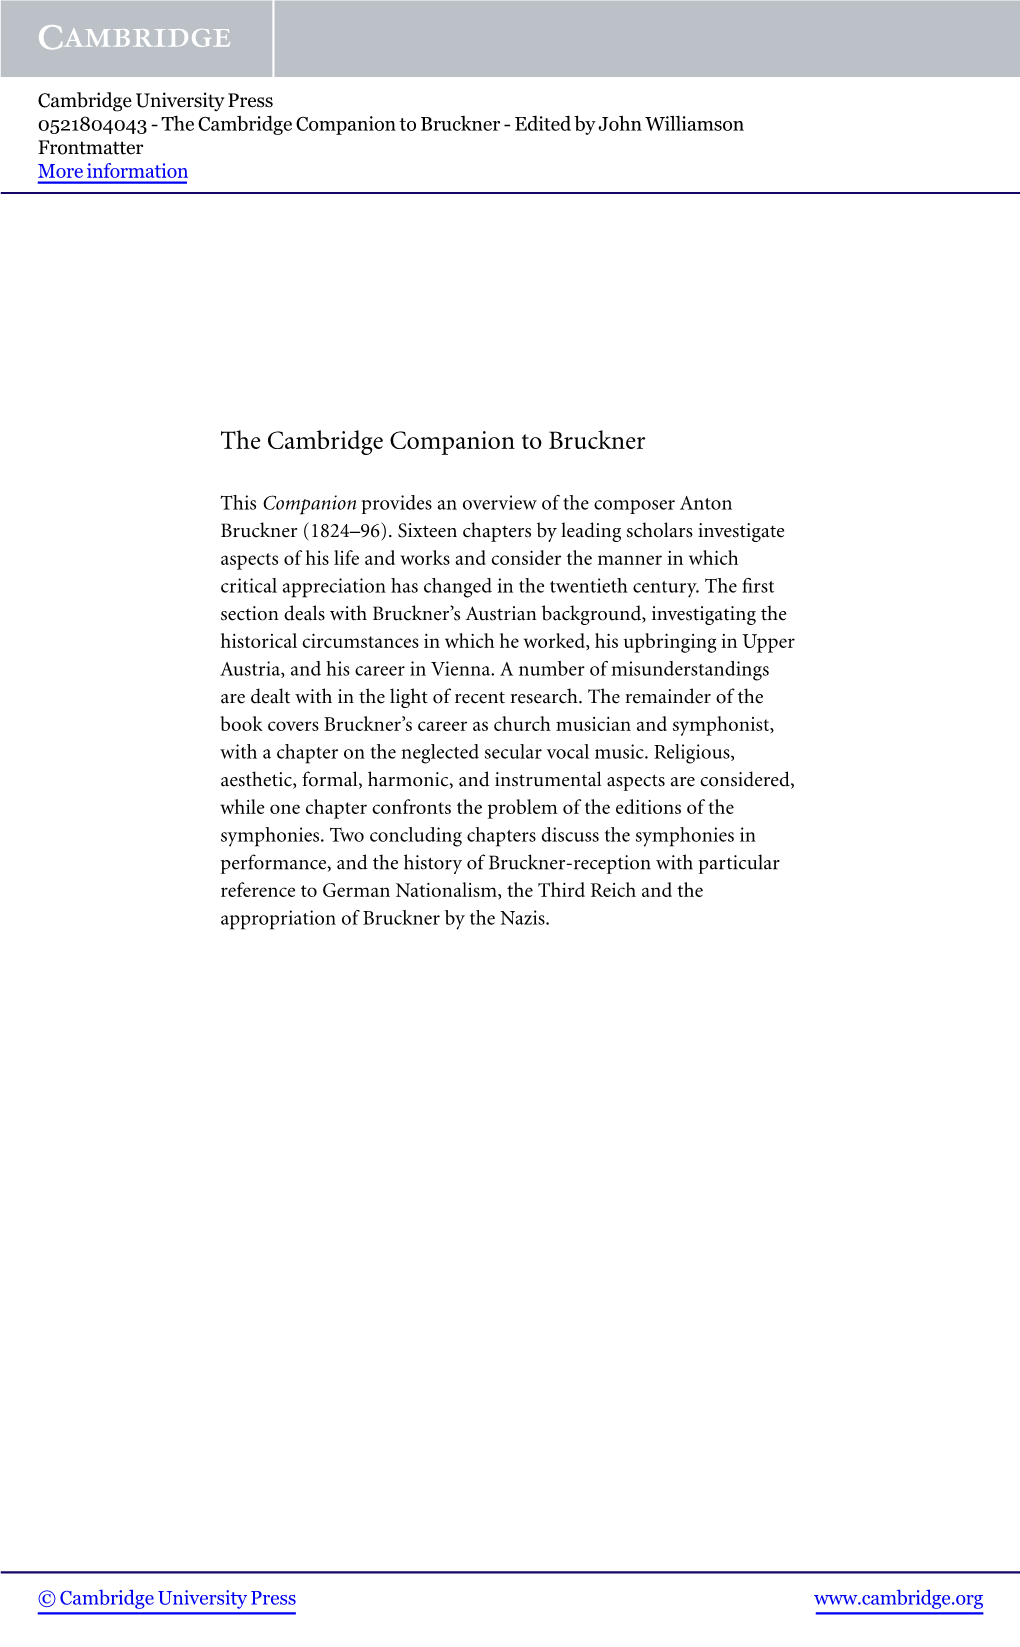 The Cambridge Companion to Bruckner - Edited by John Williamson Frontmatter More Information